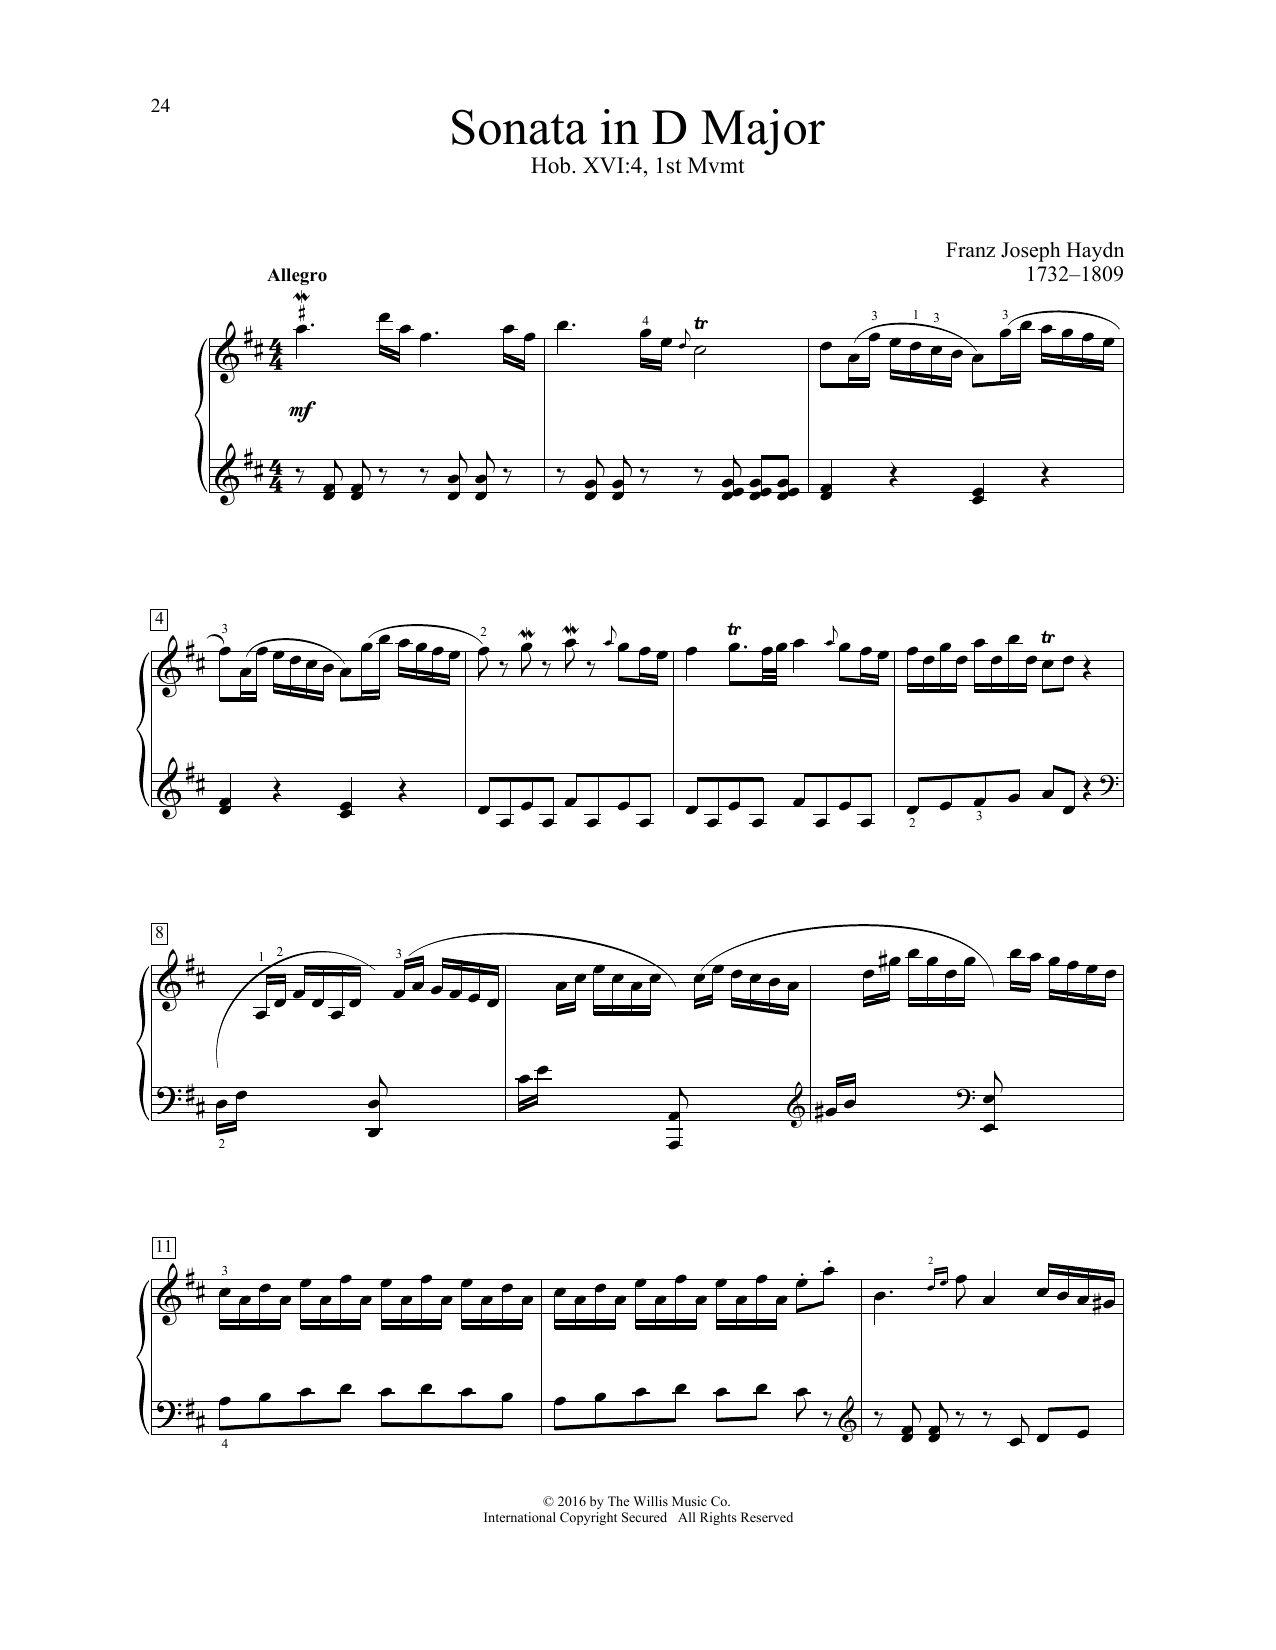 Alexander Scriabin Prelude In D Major, Op. 11, No. 5 sheet music notes and chords. Download Printable PDF.